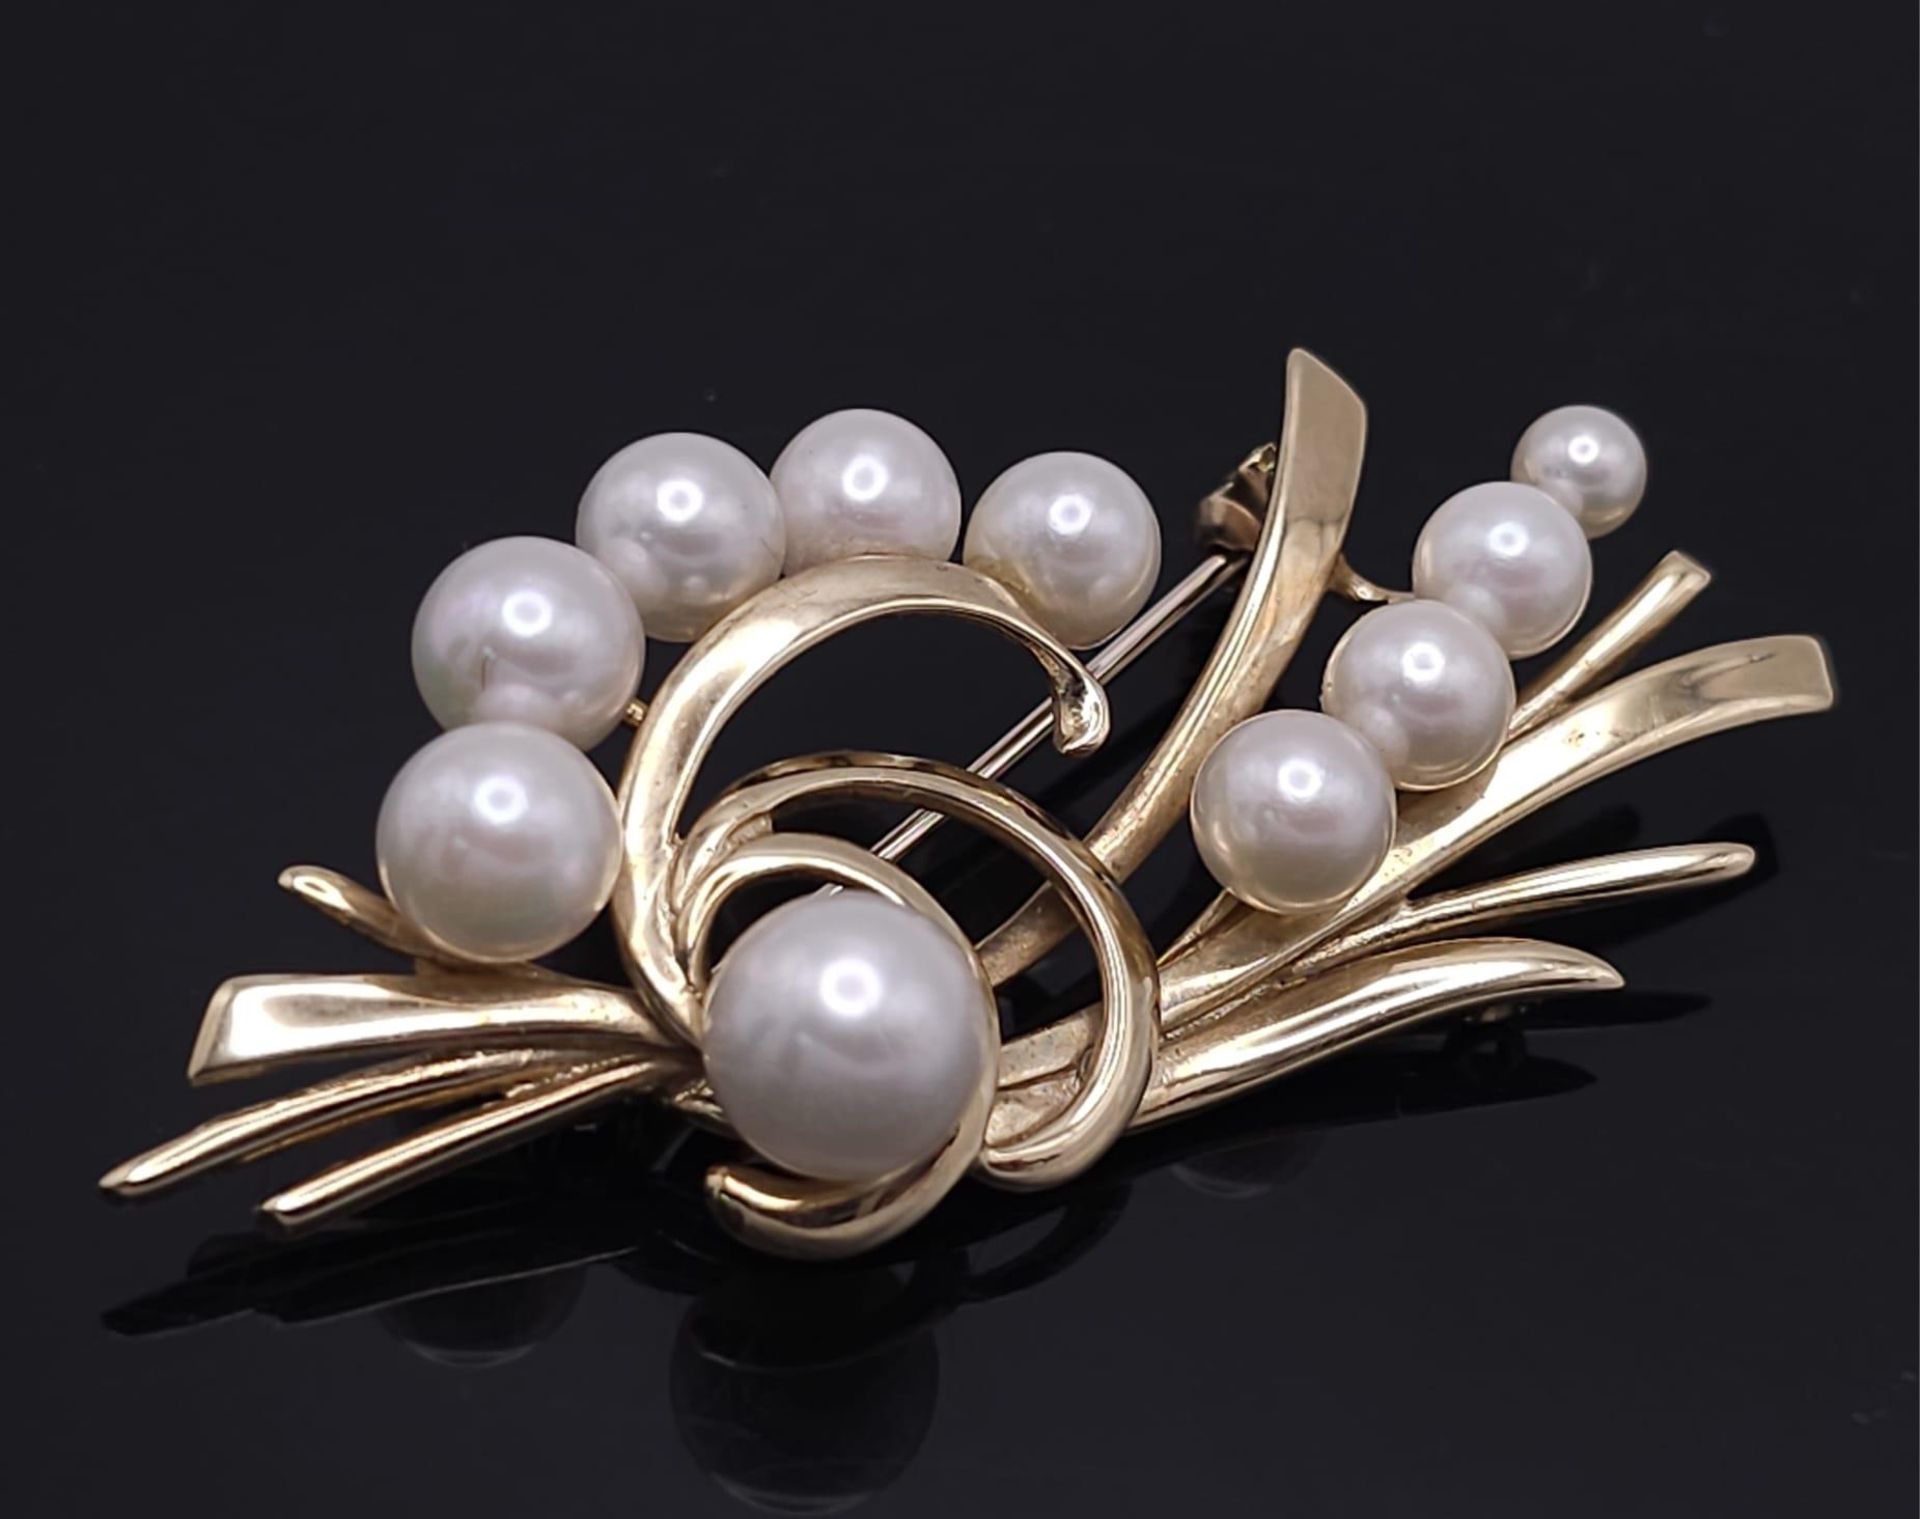 A 9k Yellow Gold and Pearl Decorative Floral Brooch. 5cm. 8g weight - Image 3 of 23